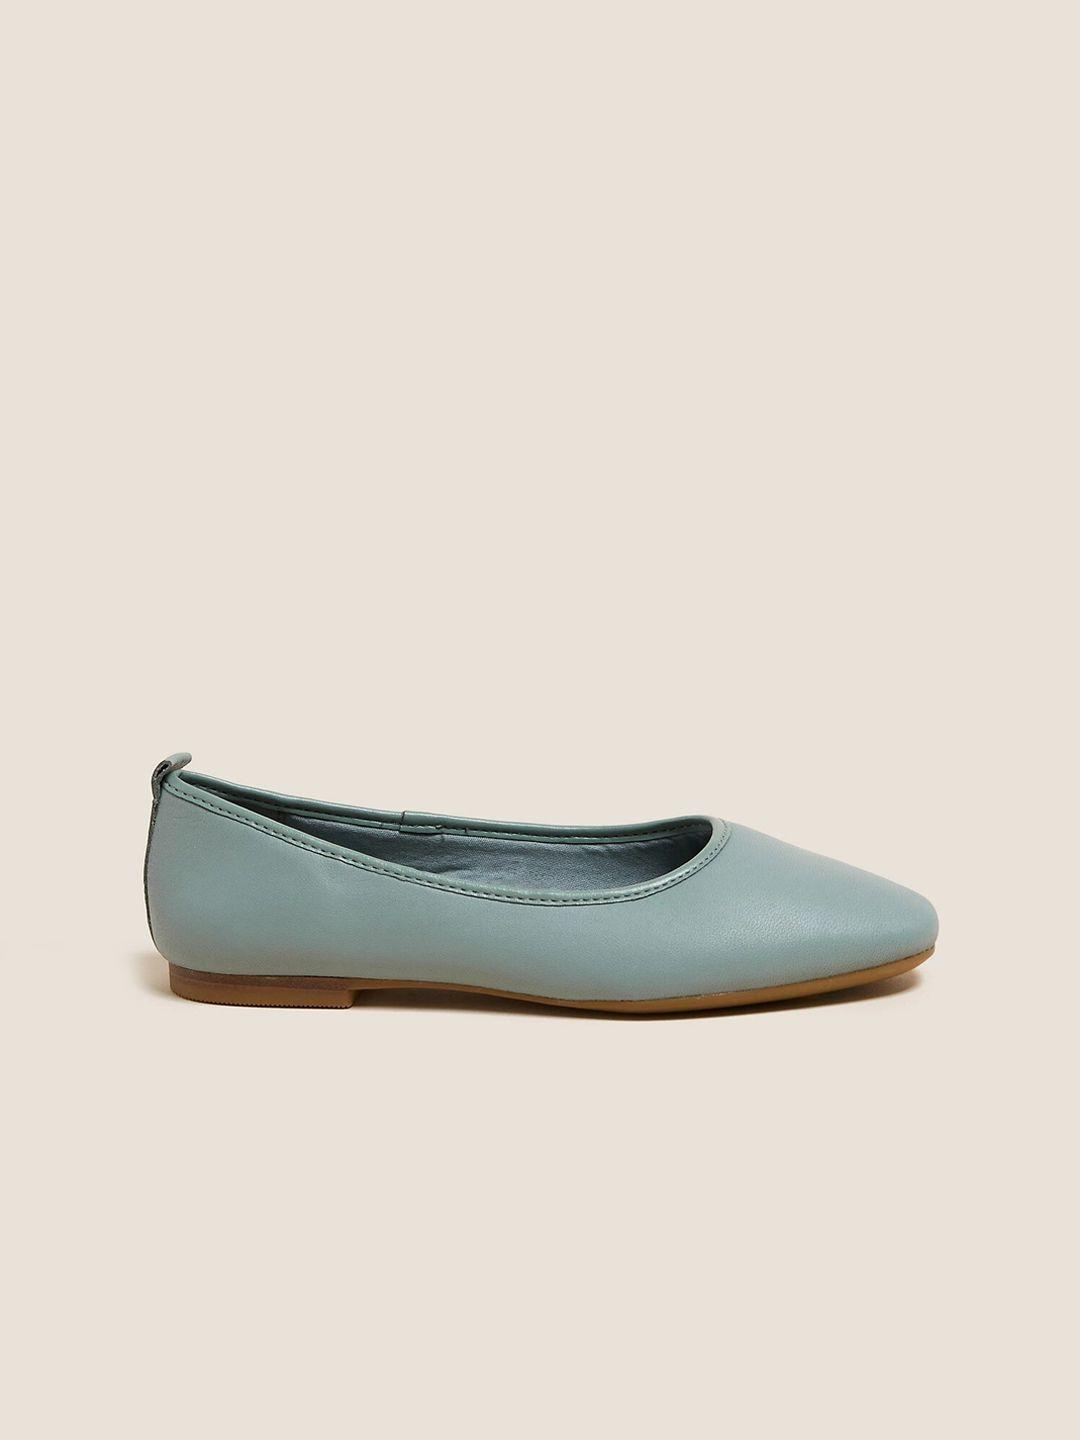 marks & spencer women green solid synthetic leather ballerinas flats